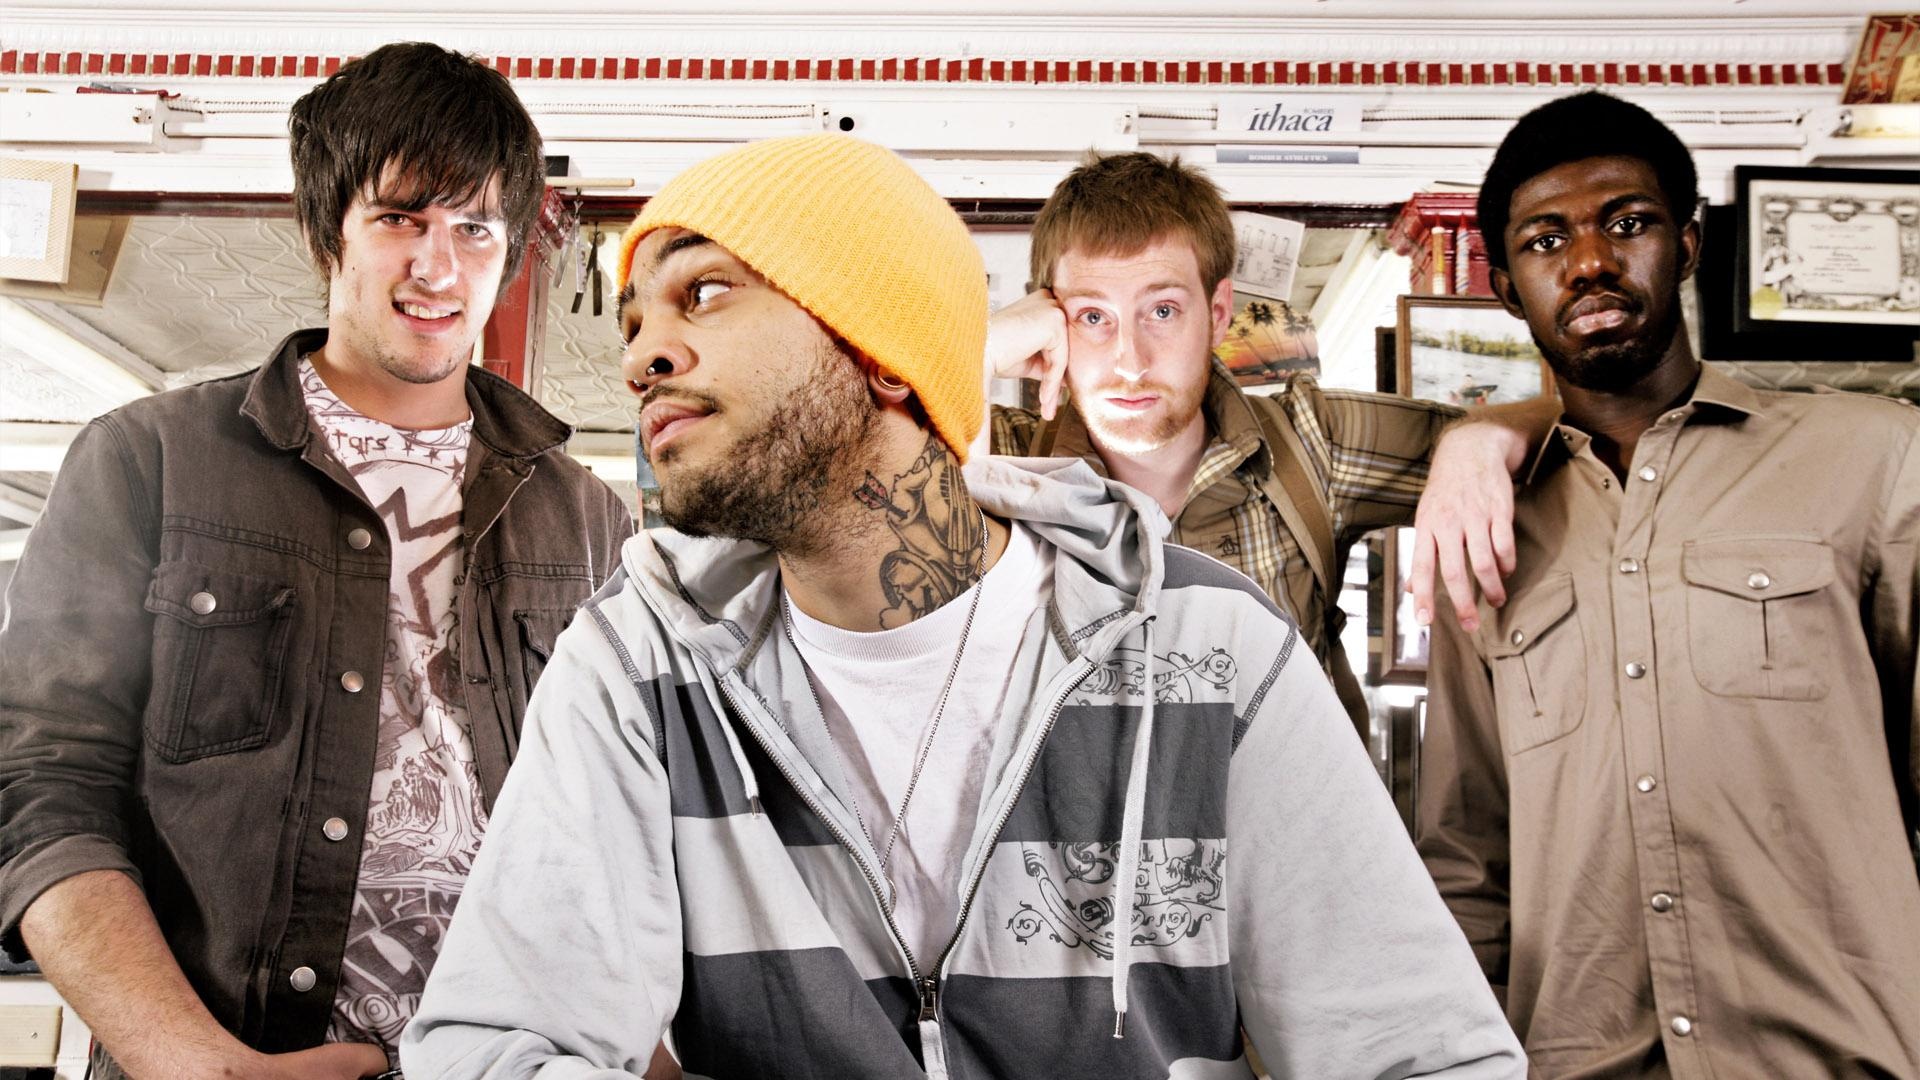 Gym Class Heroes wallpapers, Impressive visuals, Striking backgrounds, Music-themed imagery, 1920x1080 Full HD Desktop